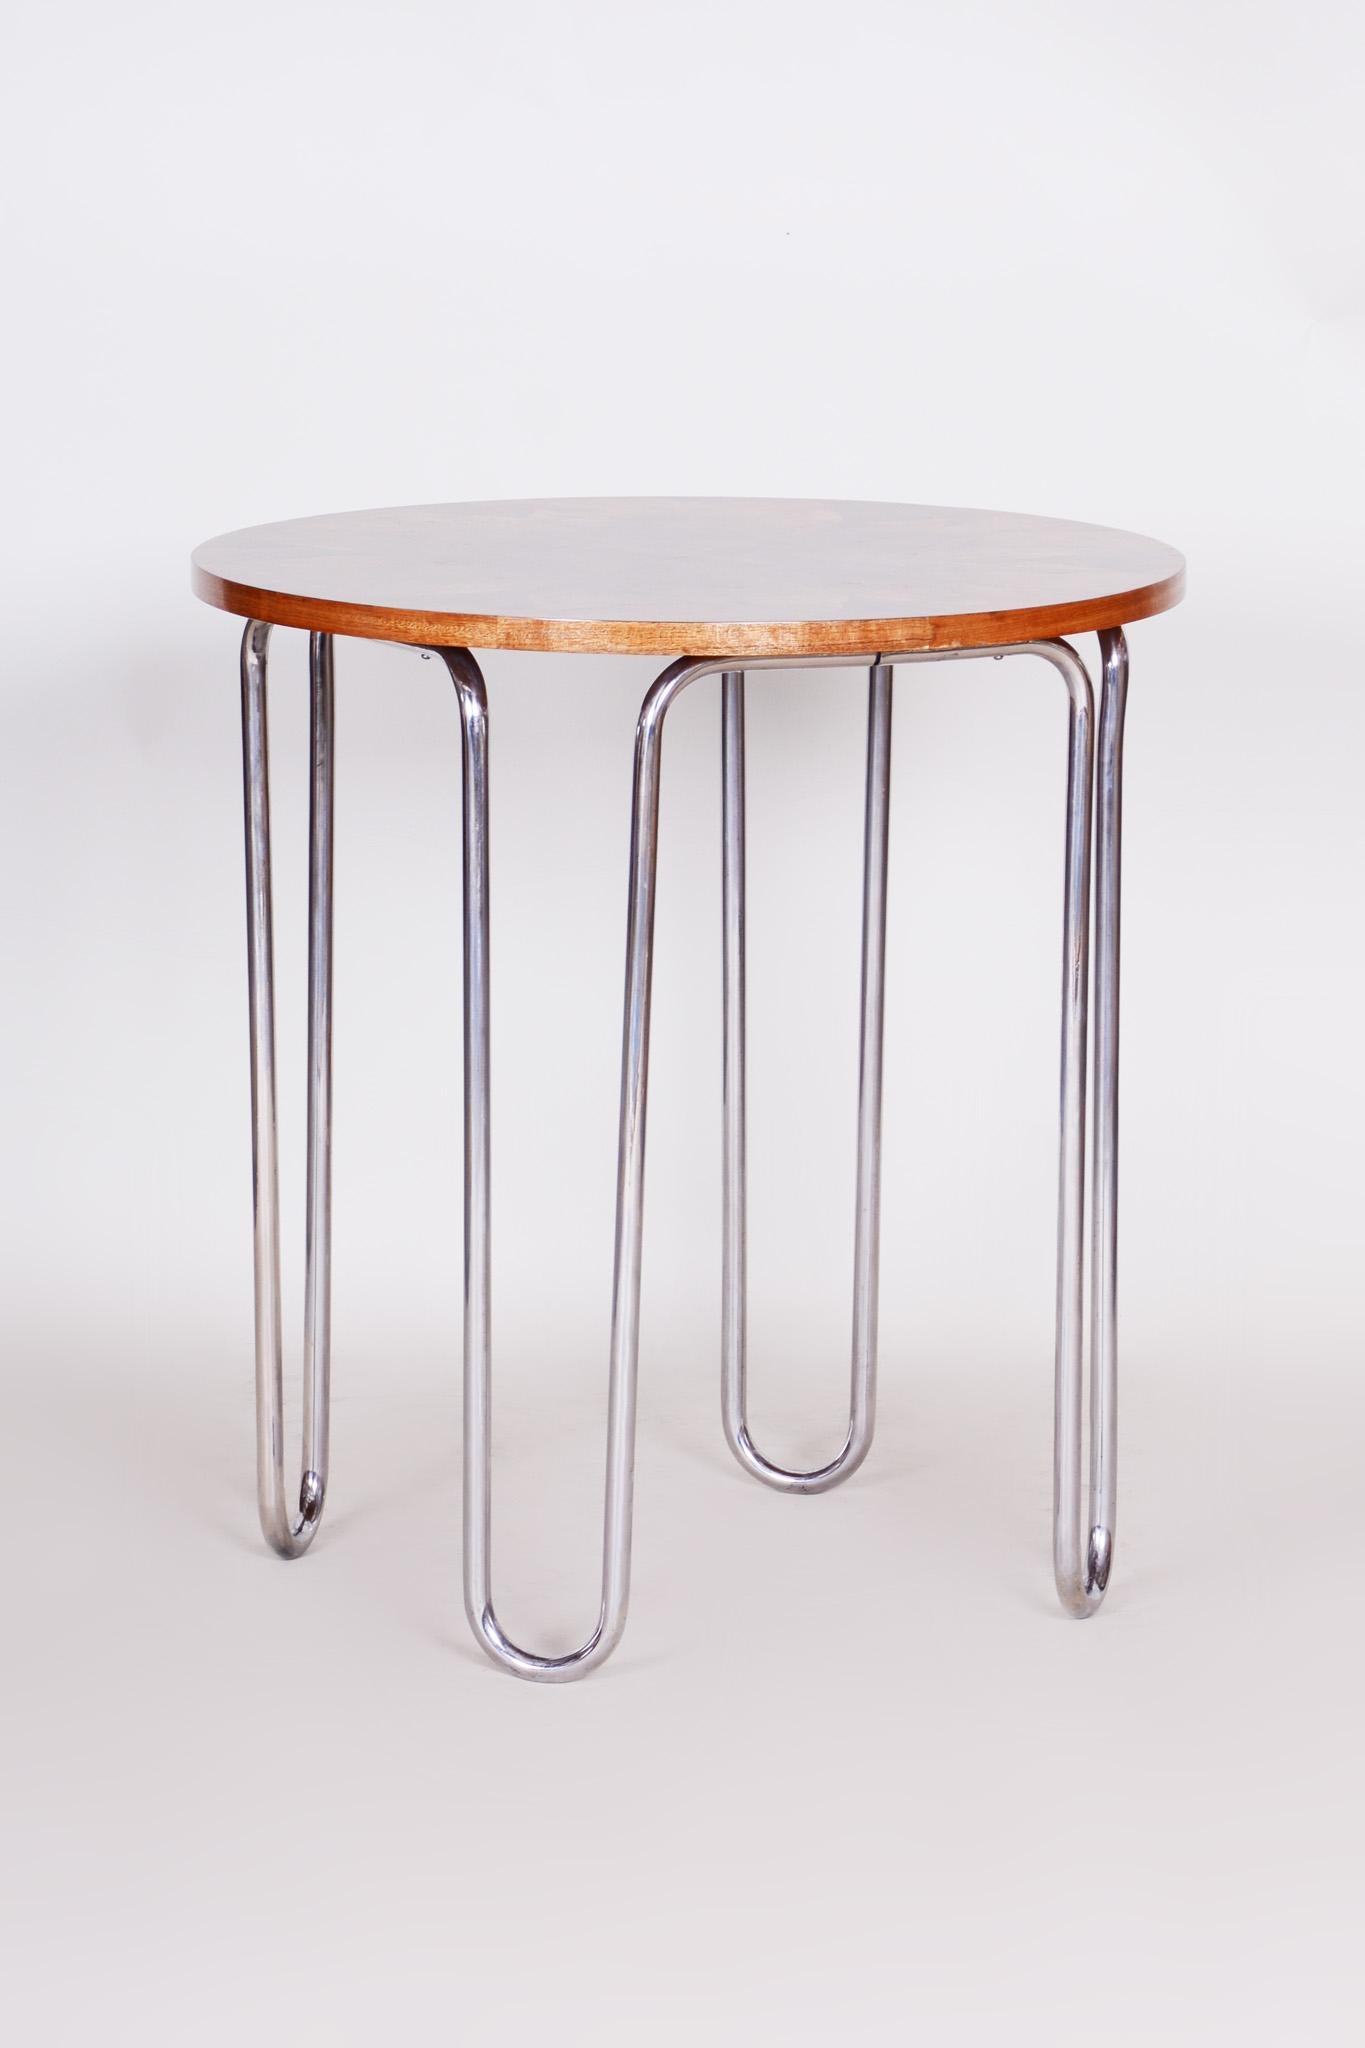 Bauhaus chrome table
Style: Bauhaus.
Period: 1930-1939. 
Material: Walnut and chrome-plated steel
Source: Czechia.





